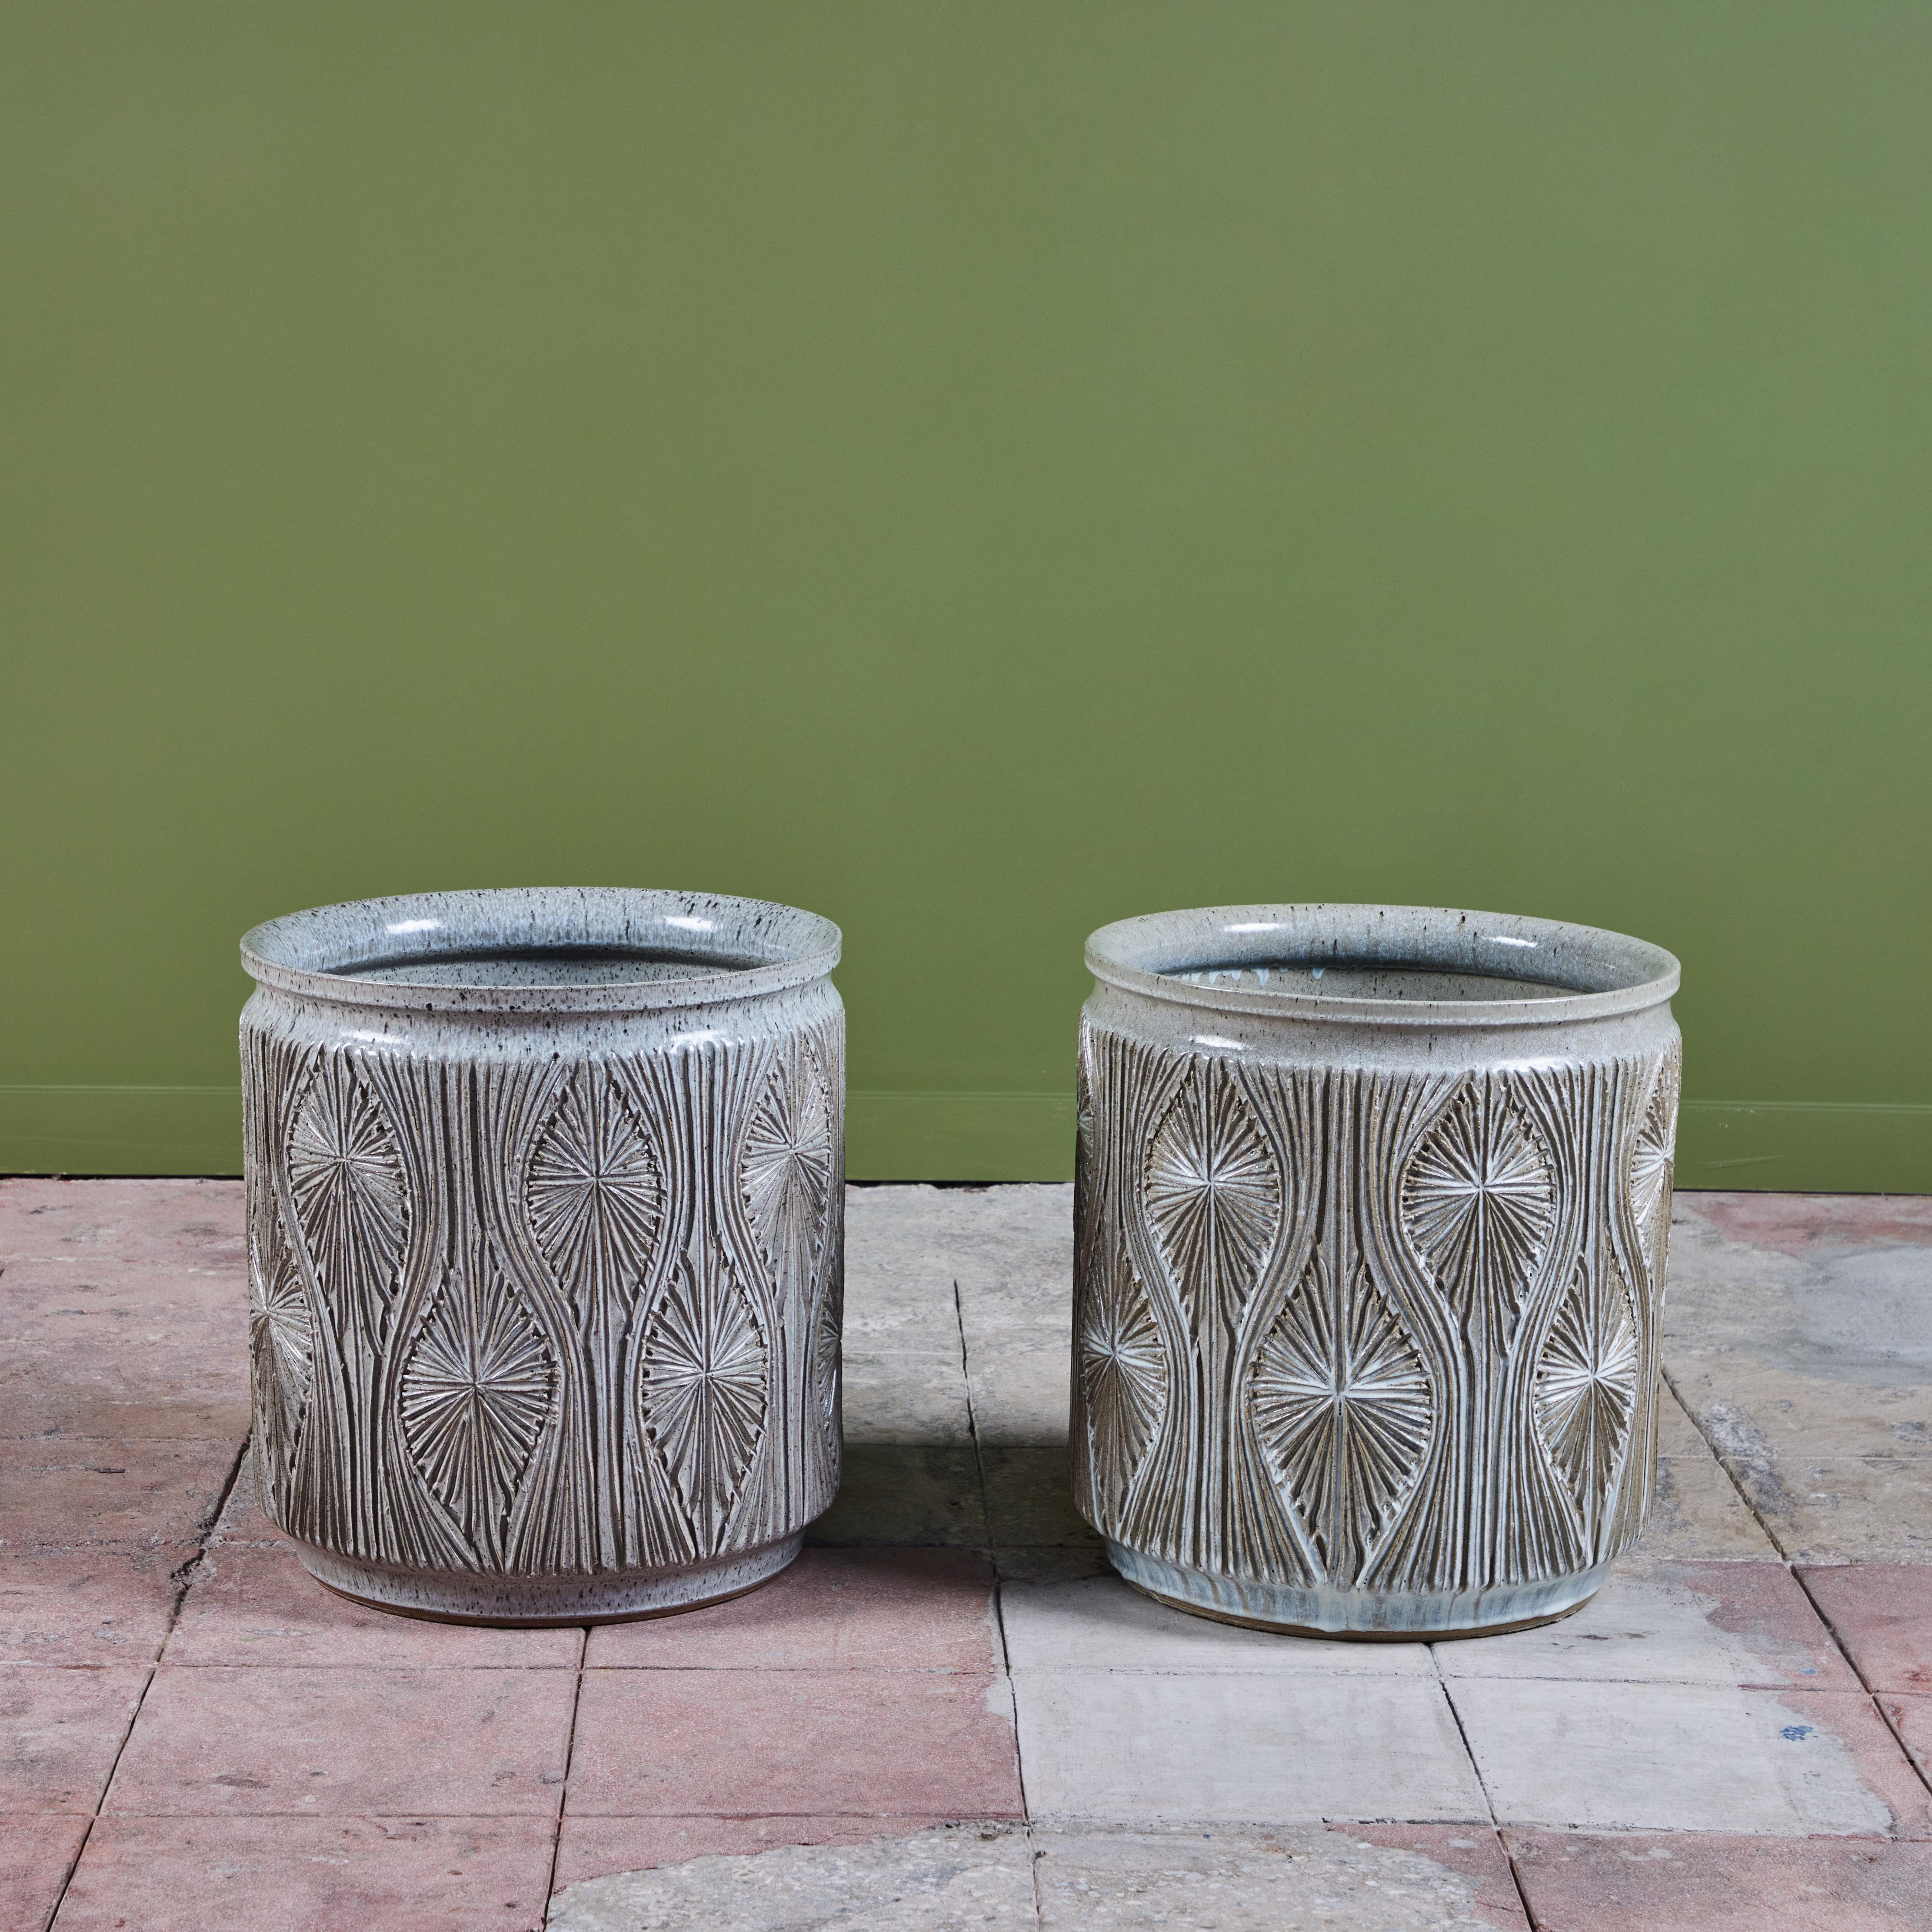 Cylindrical pair of planters from Earthgender, David Cressey and Robert Maxwell’s early 1970s project. These 17.75” diameter examples are incised in the “Teardrop Sunburst” design with interlocking gestural curves separating a pattern of lines